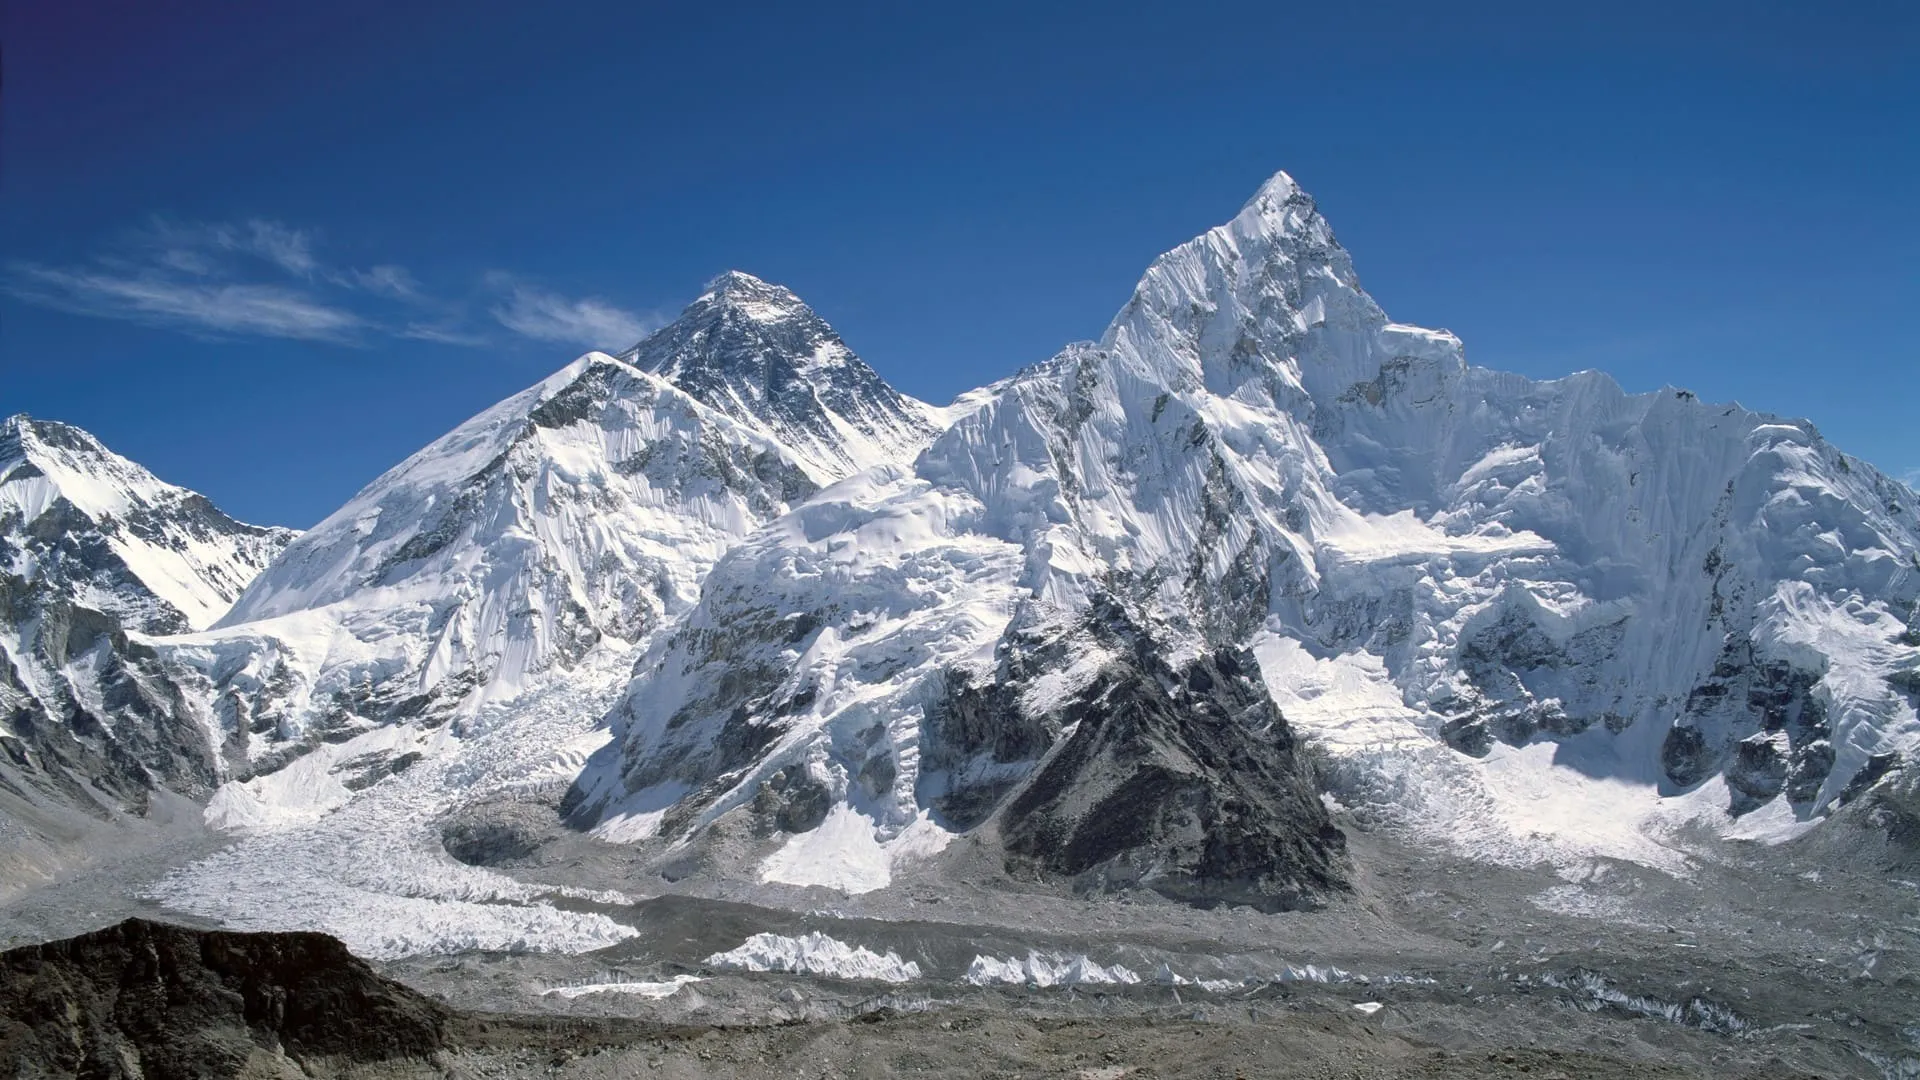 Mount Everest-Nepal in Nepal, Central Asia | Mountains - Rated 0.7